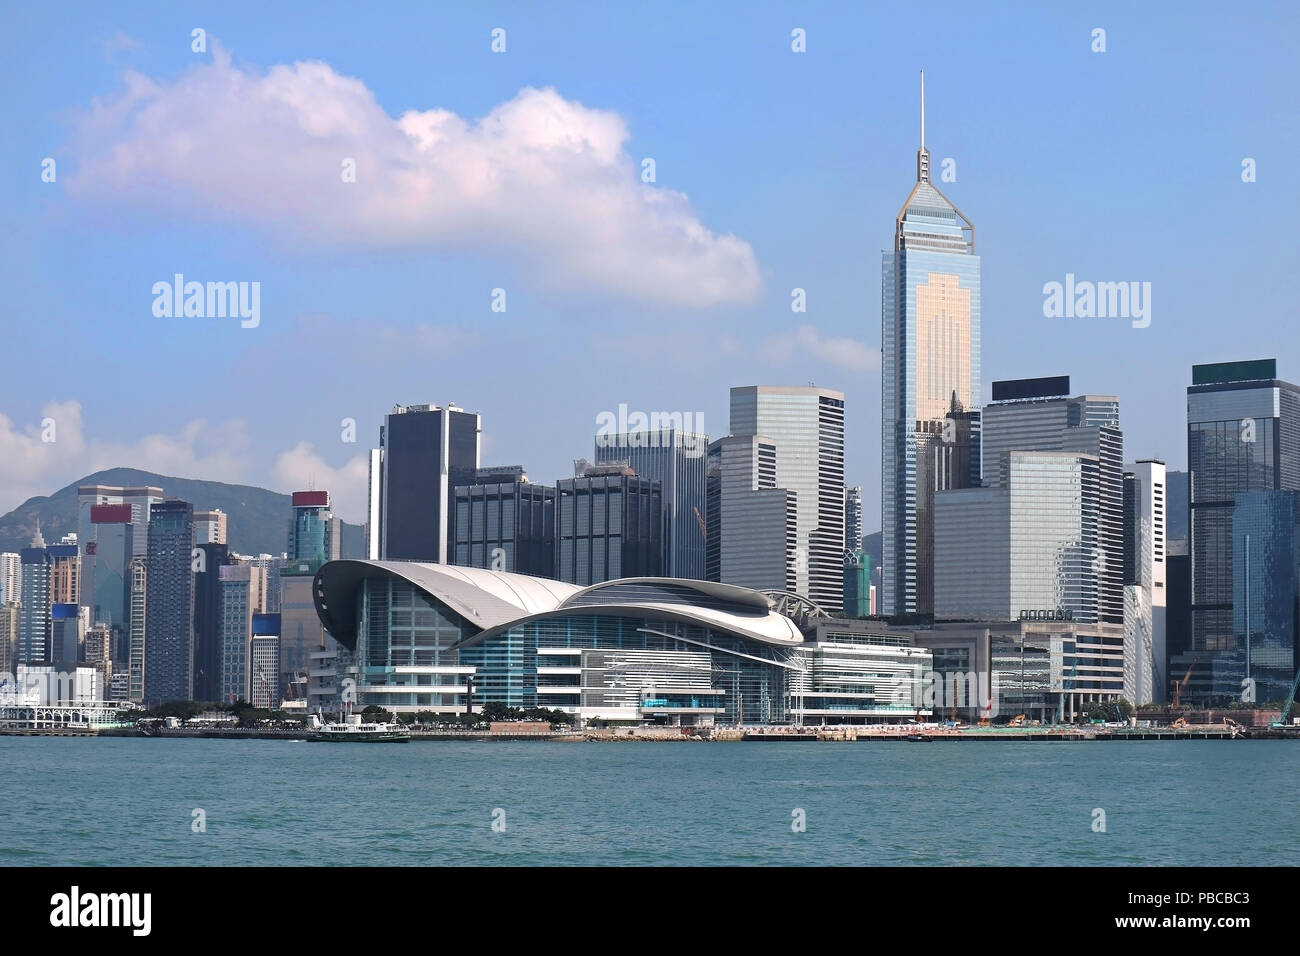 Hong Kong Convention and Exhibition Centre building is located in Wan Chai North, Hong Kong Island and is linked by walkways to nearby buildings. Stock Photo